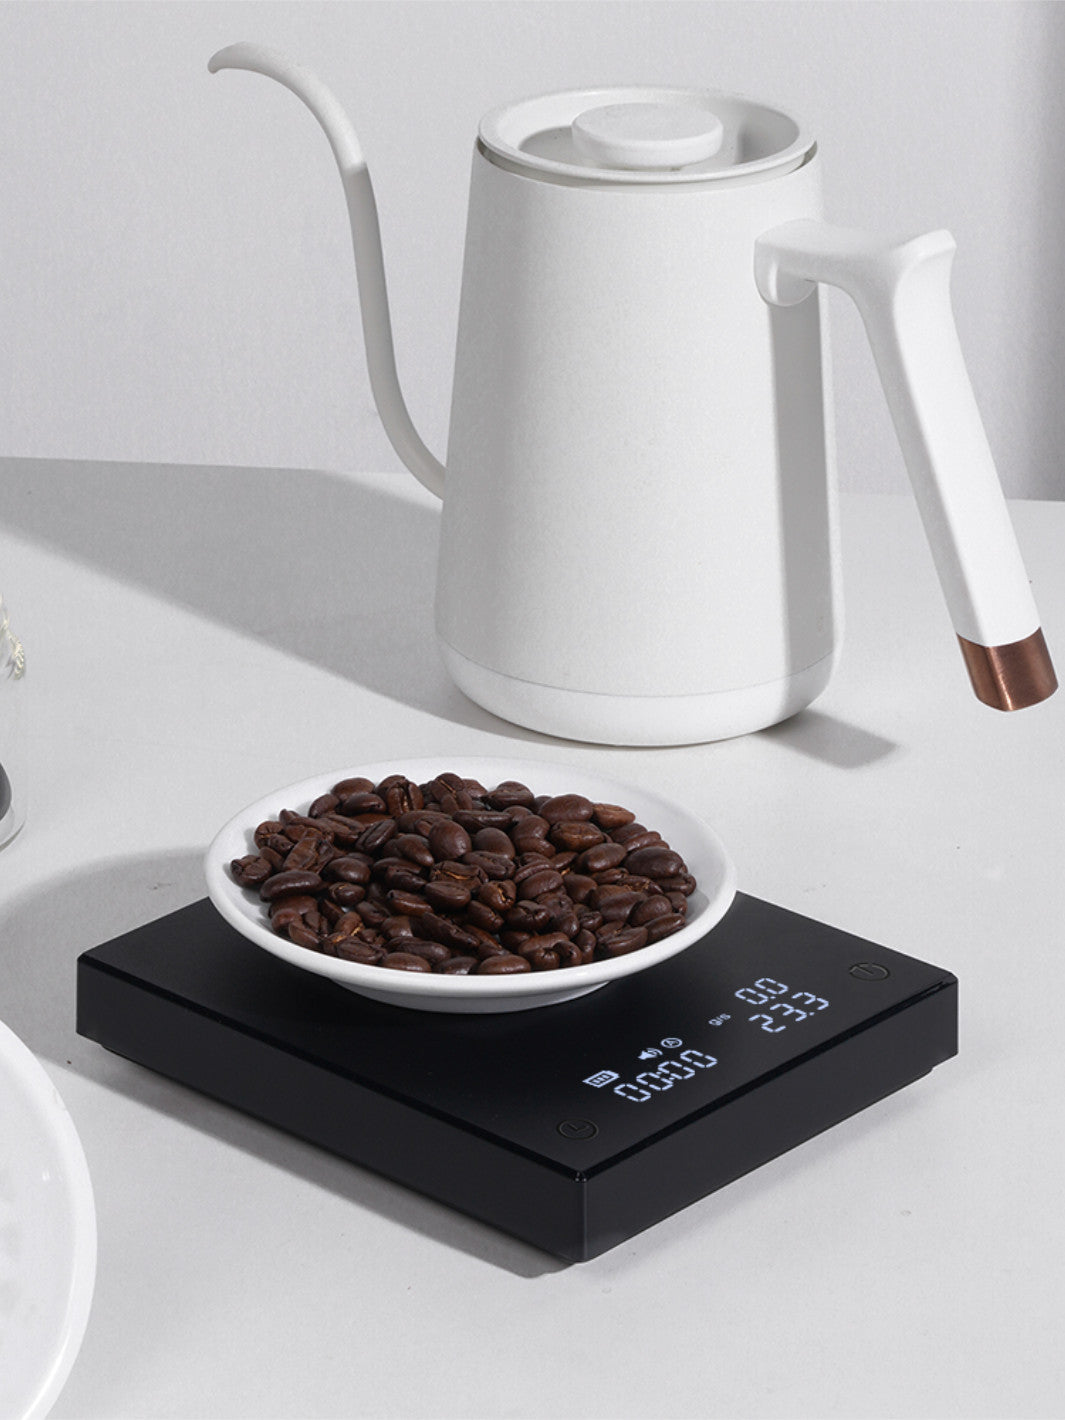 TIMEMORE Black Mirror BASIC 2 Coffee Scale / Digital Scales